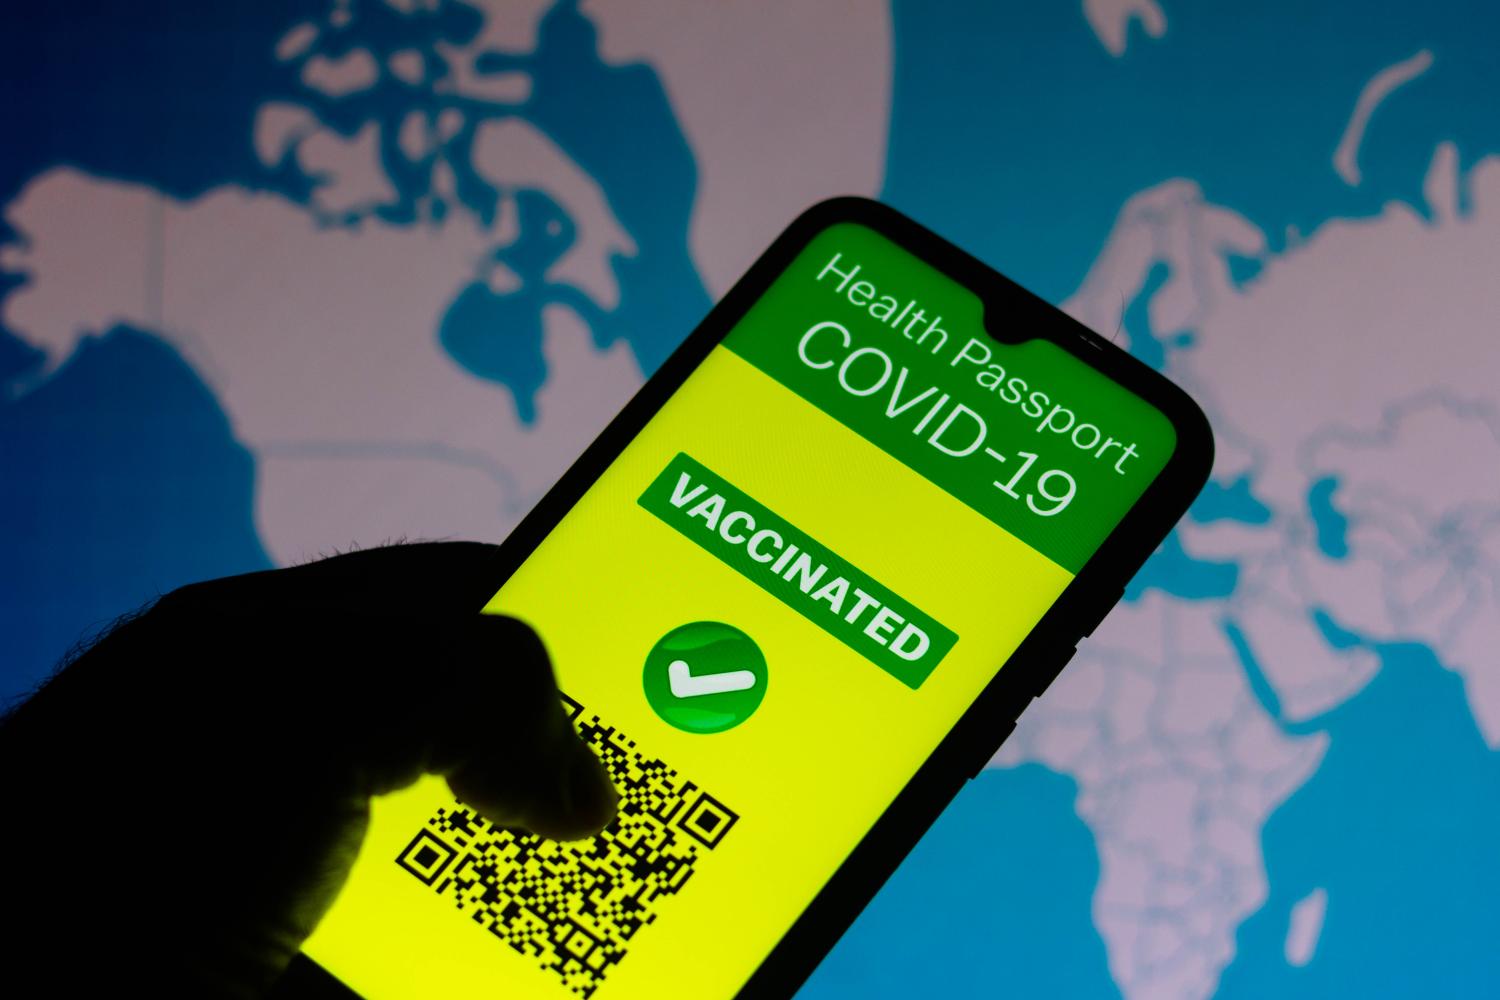 A vaccination passport application for COVID-19 is displayed on a smartphone.